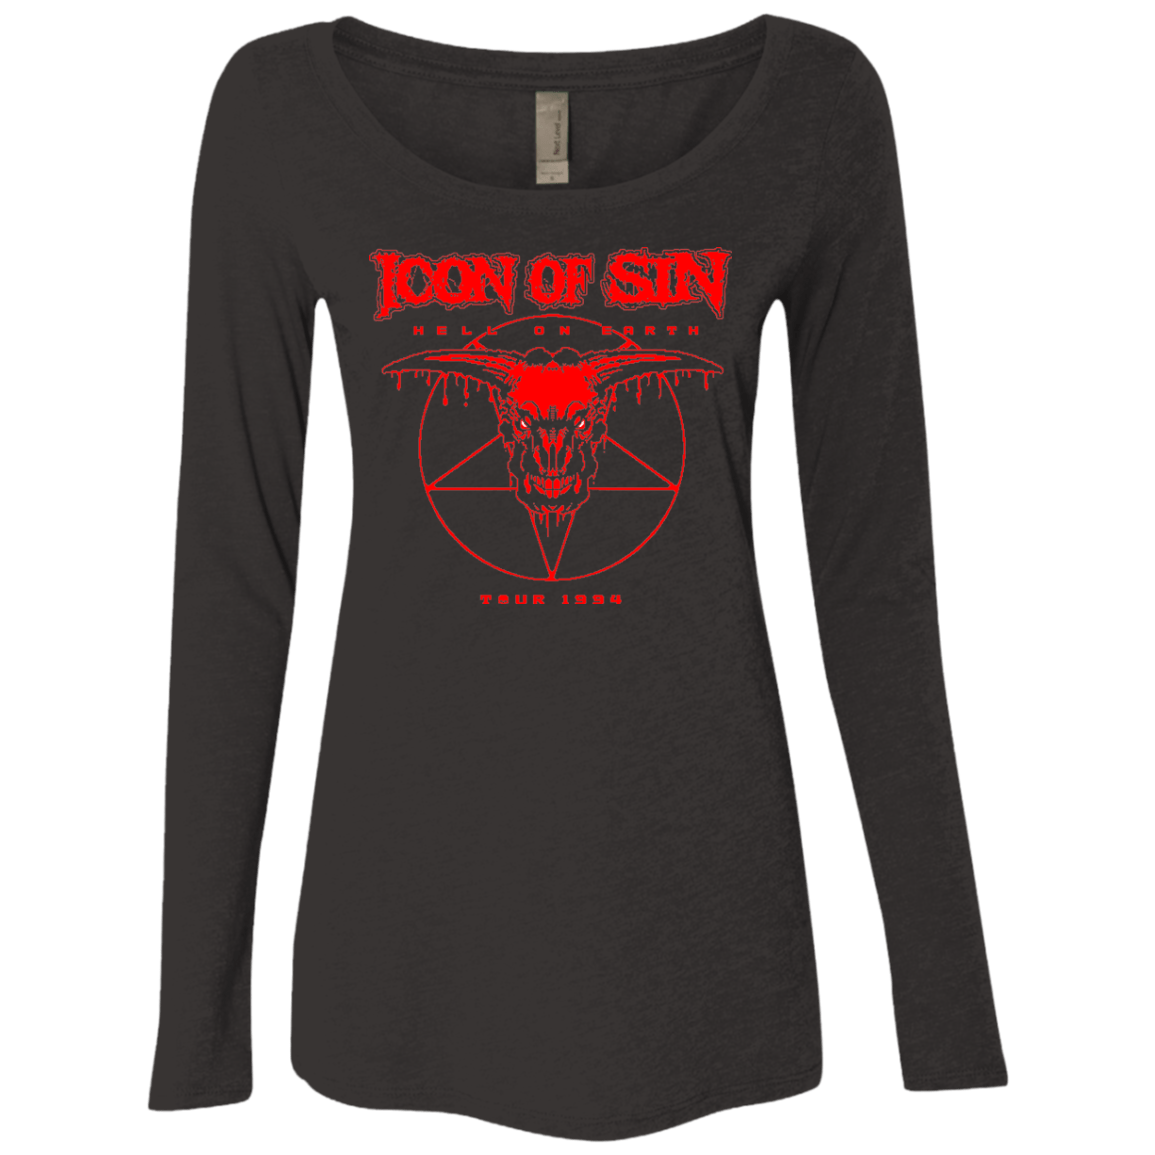 T-Shirts Vintage Black / Small Icon of Sin Women's Triblend Long Sleeve Shirt